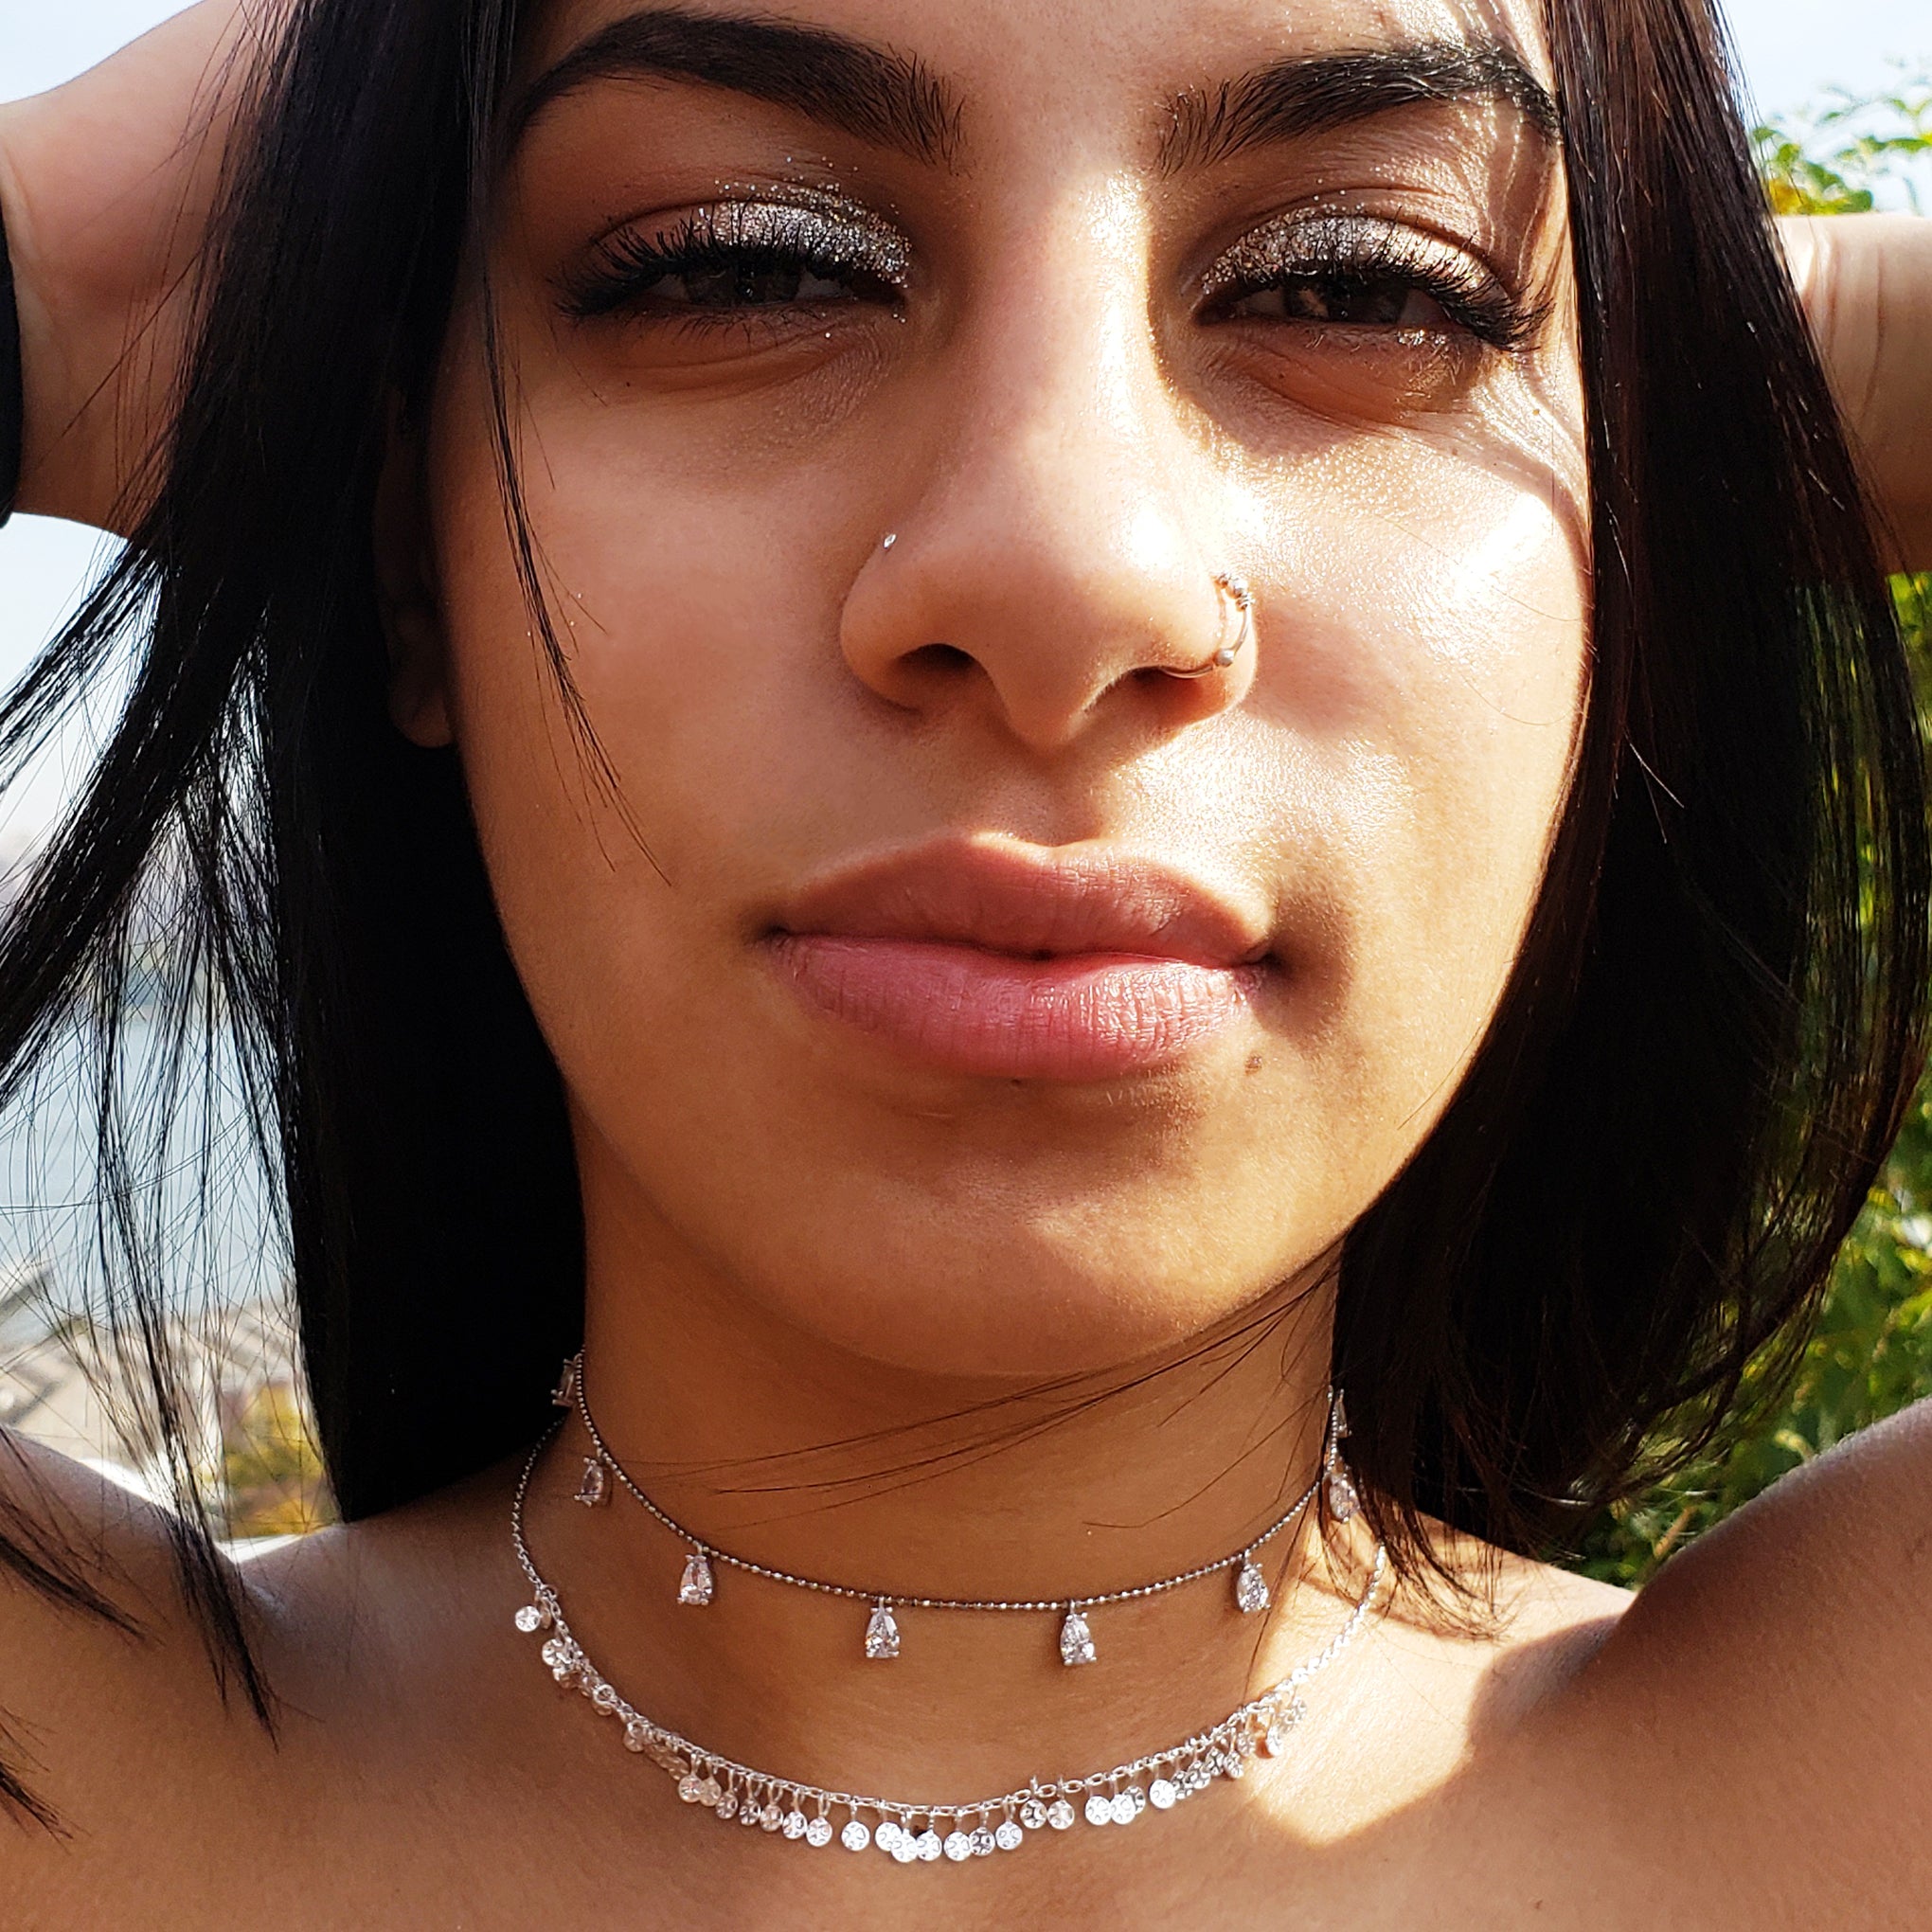 baddest bish ever fine jewelry dreamy dreams collection Sunshower Dew Drops Swarovski Crystal and Sterling Silver,  14KT Gold & Rose Gold Choker beautiful model 